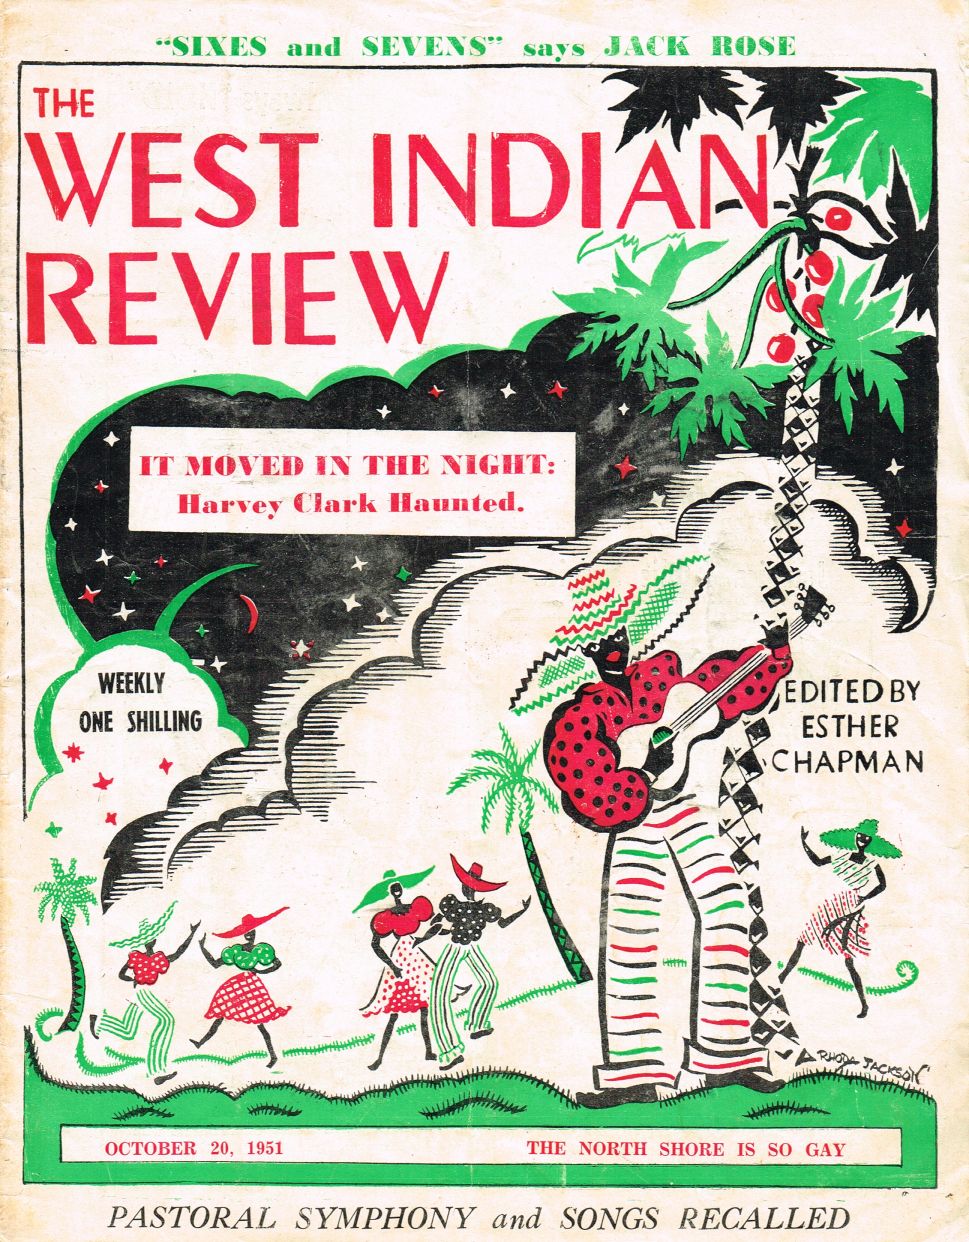 West Indian Review 1951 10 20 01